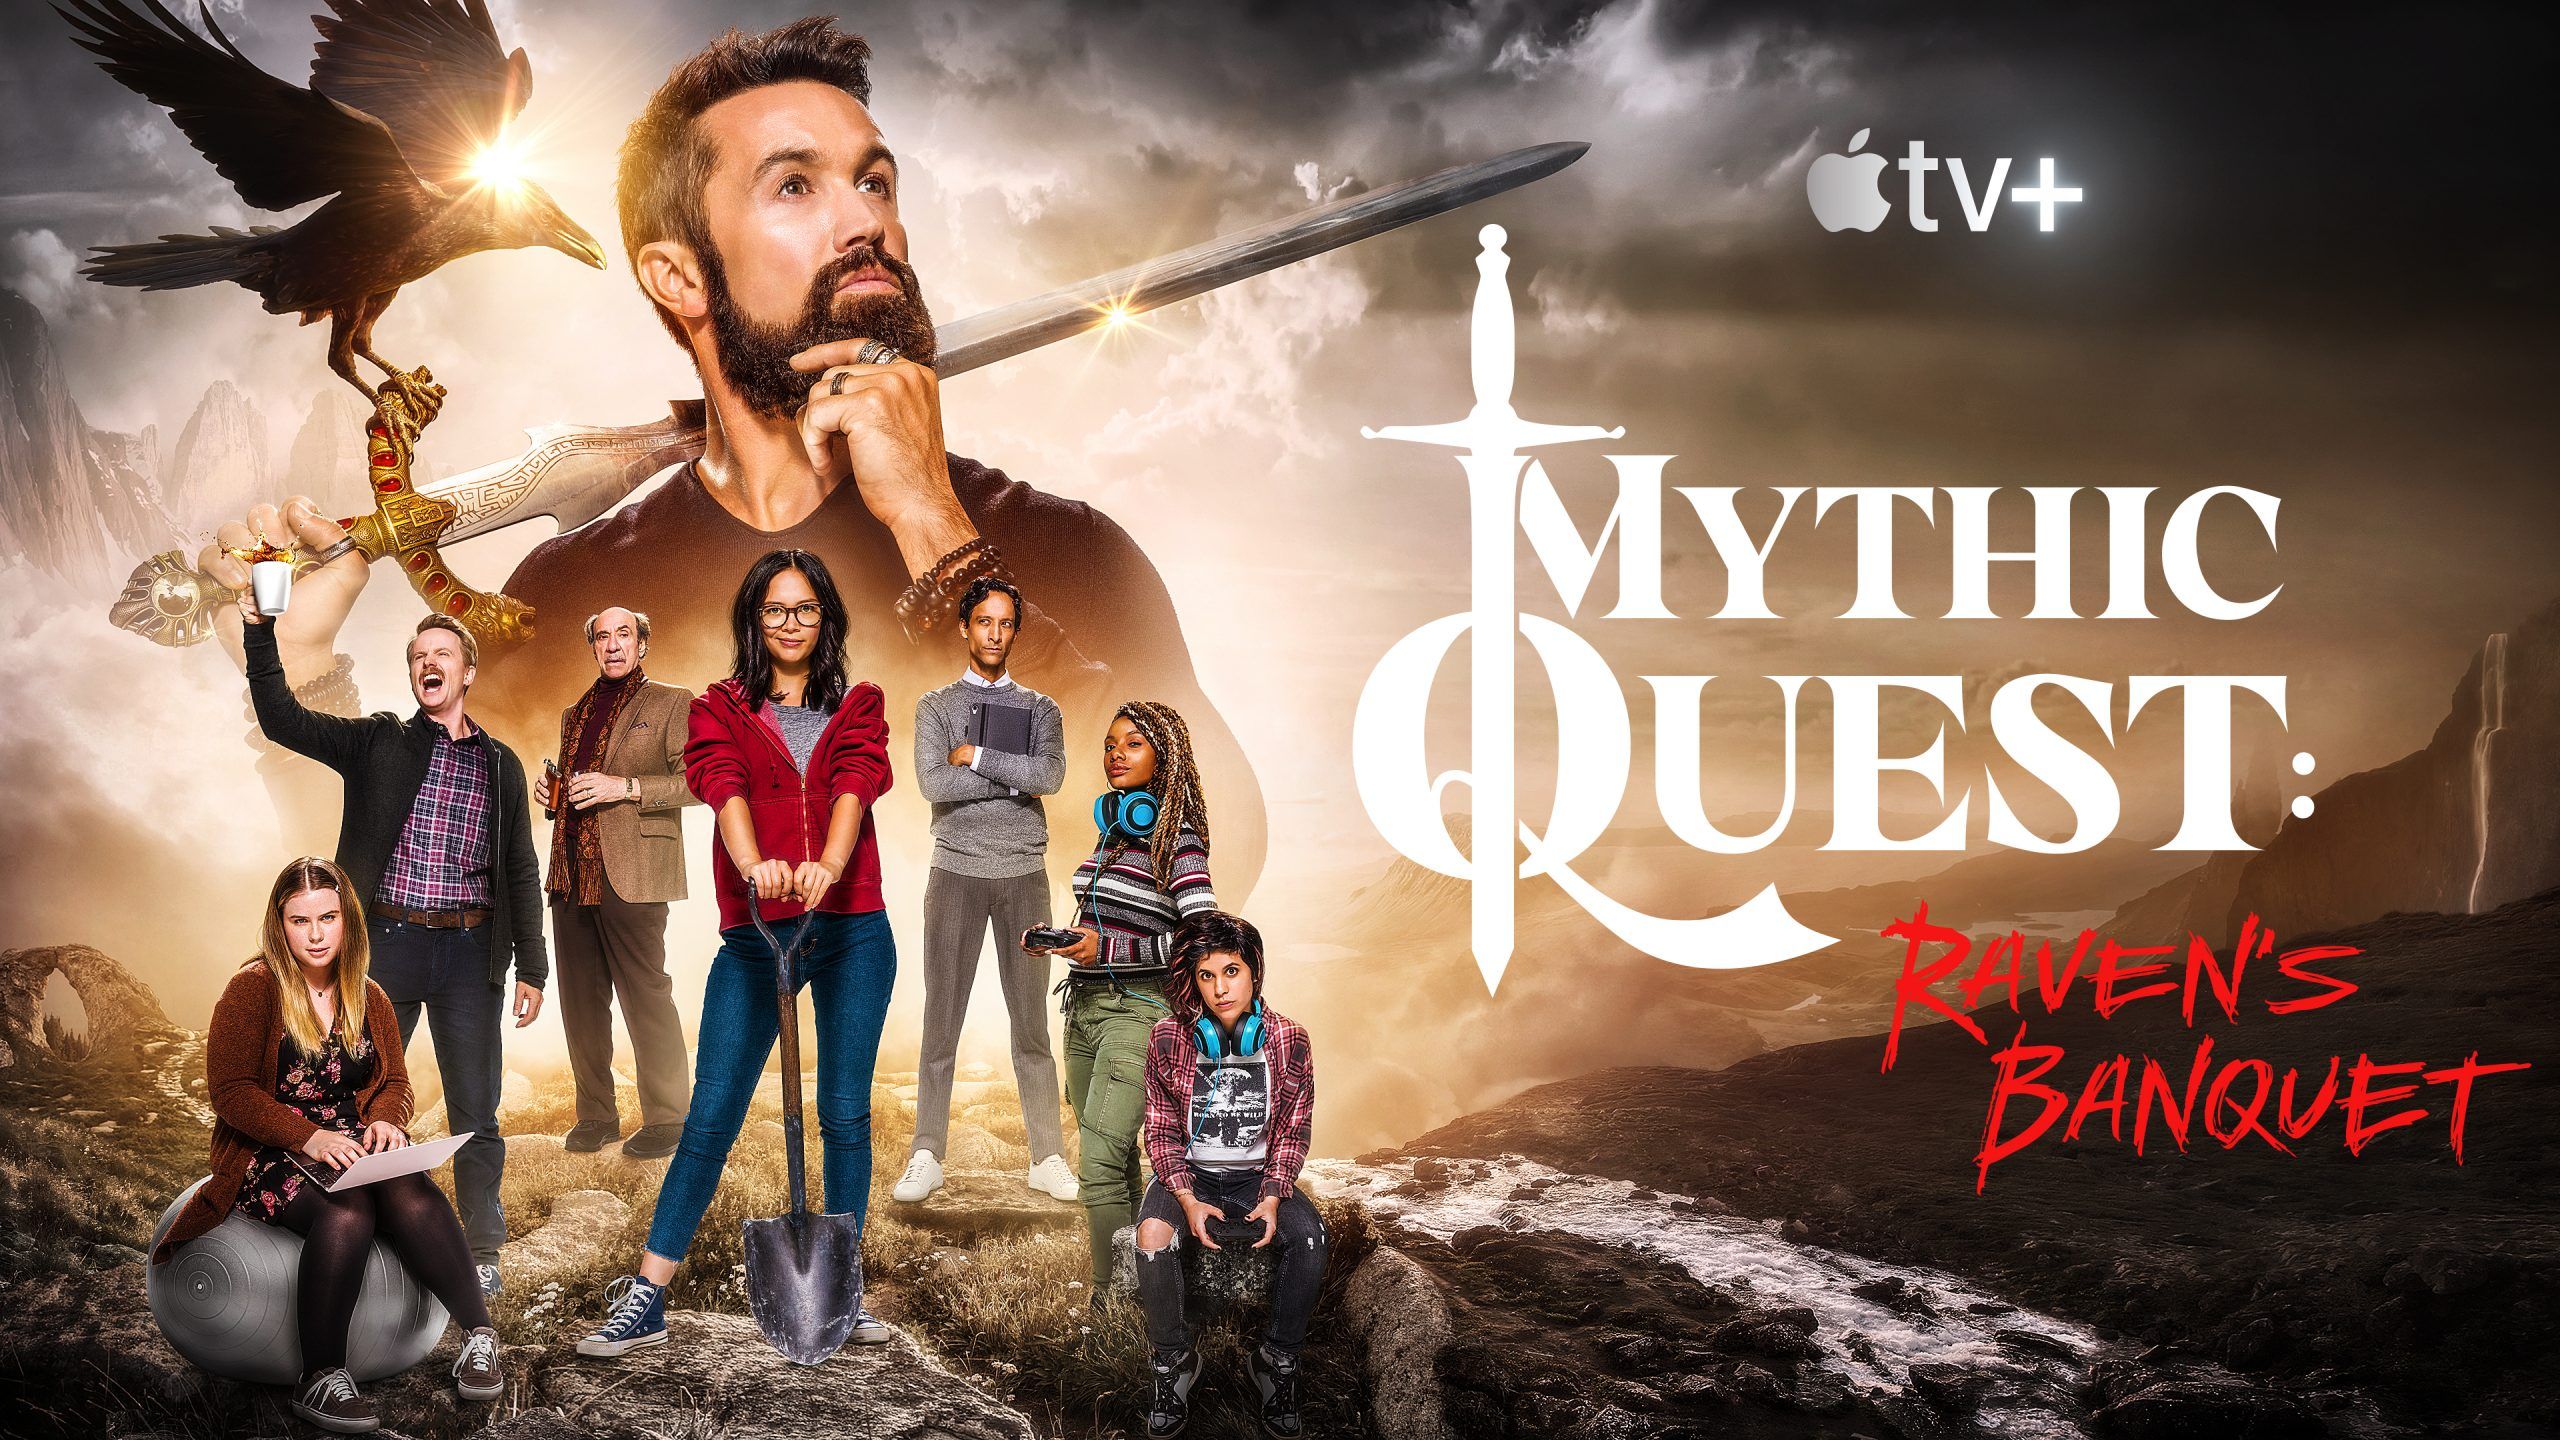 Mythic Quest: Raven's Banquet a Comedy About Game Development Coming To Apple TV+